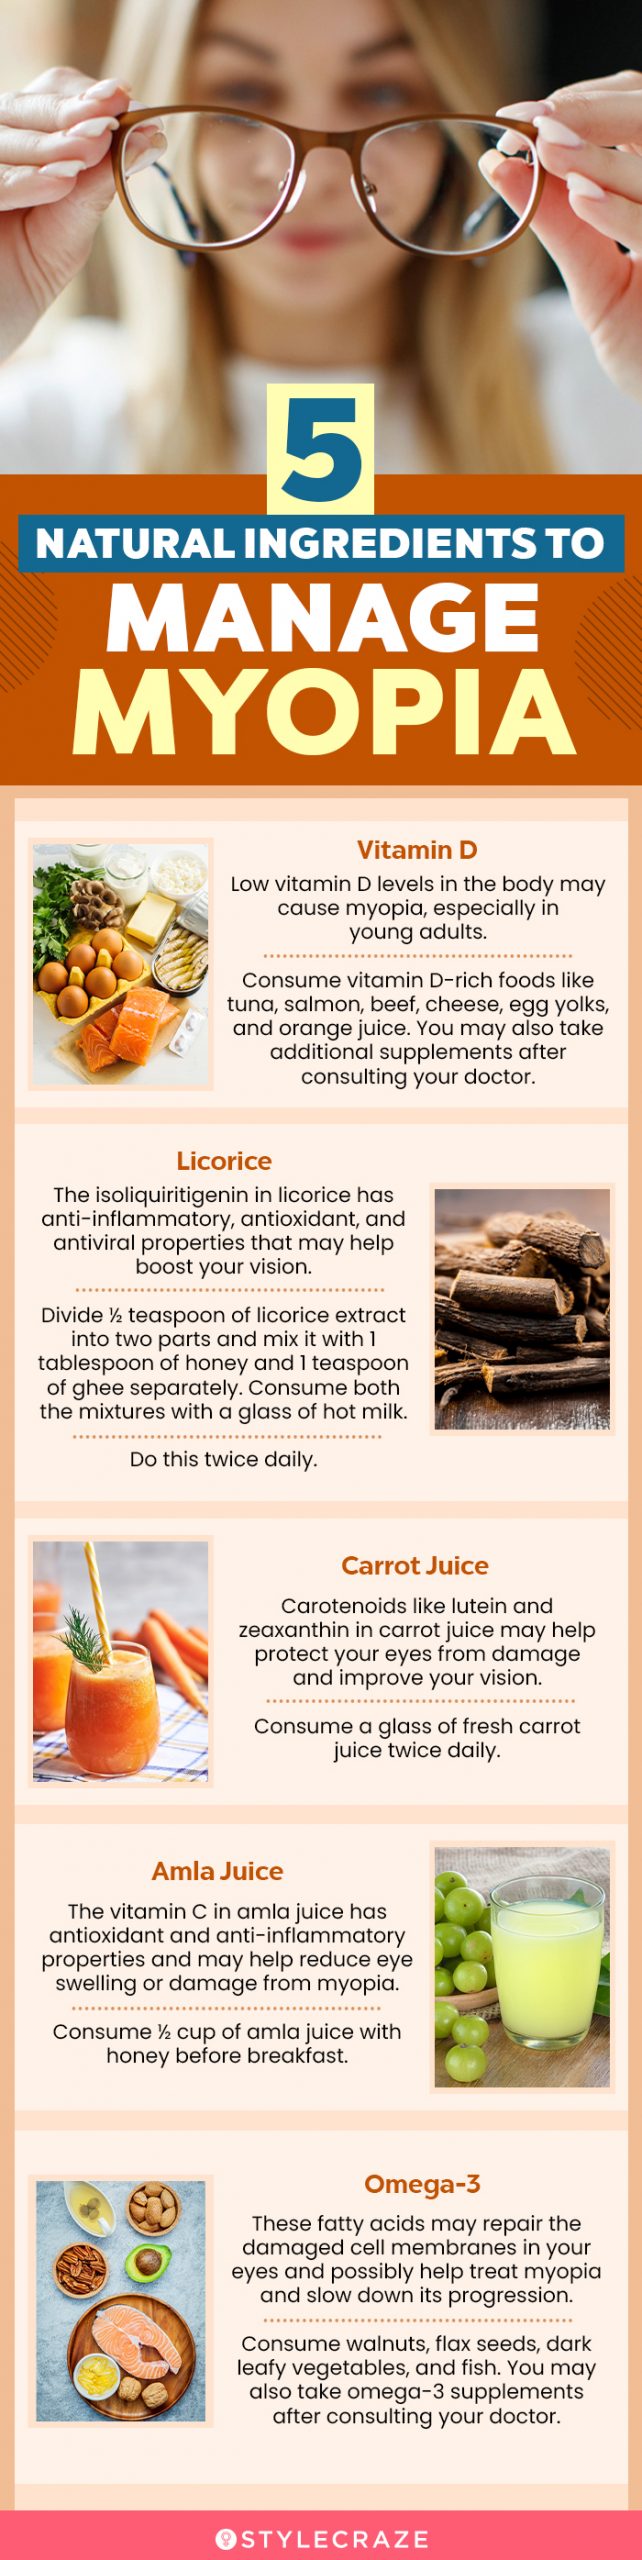 5 home remedies to manage myopia (infographic)